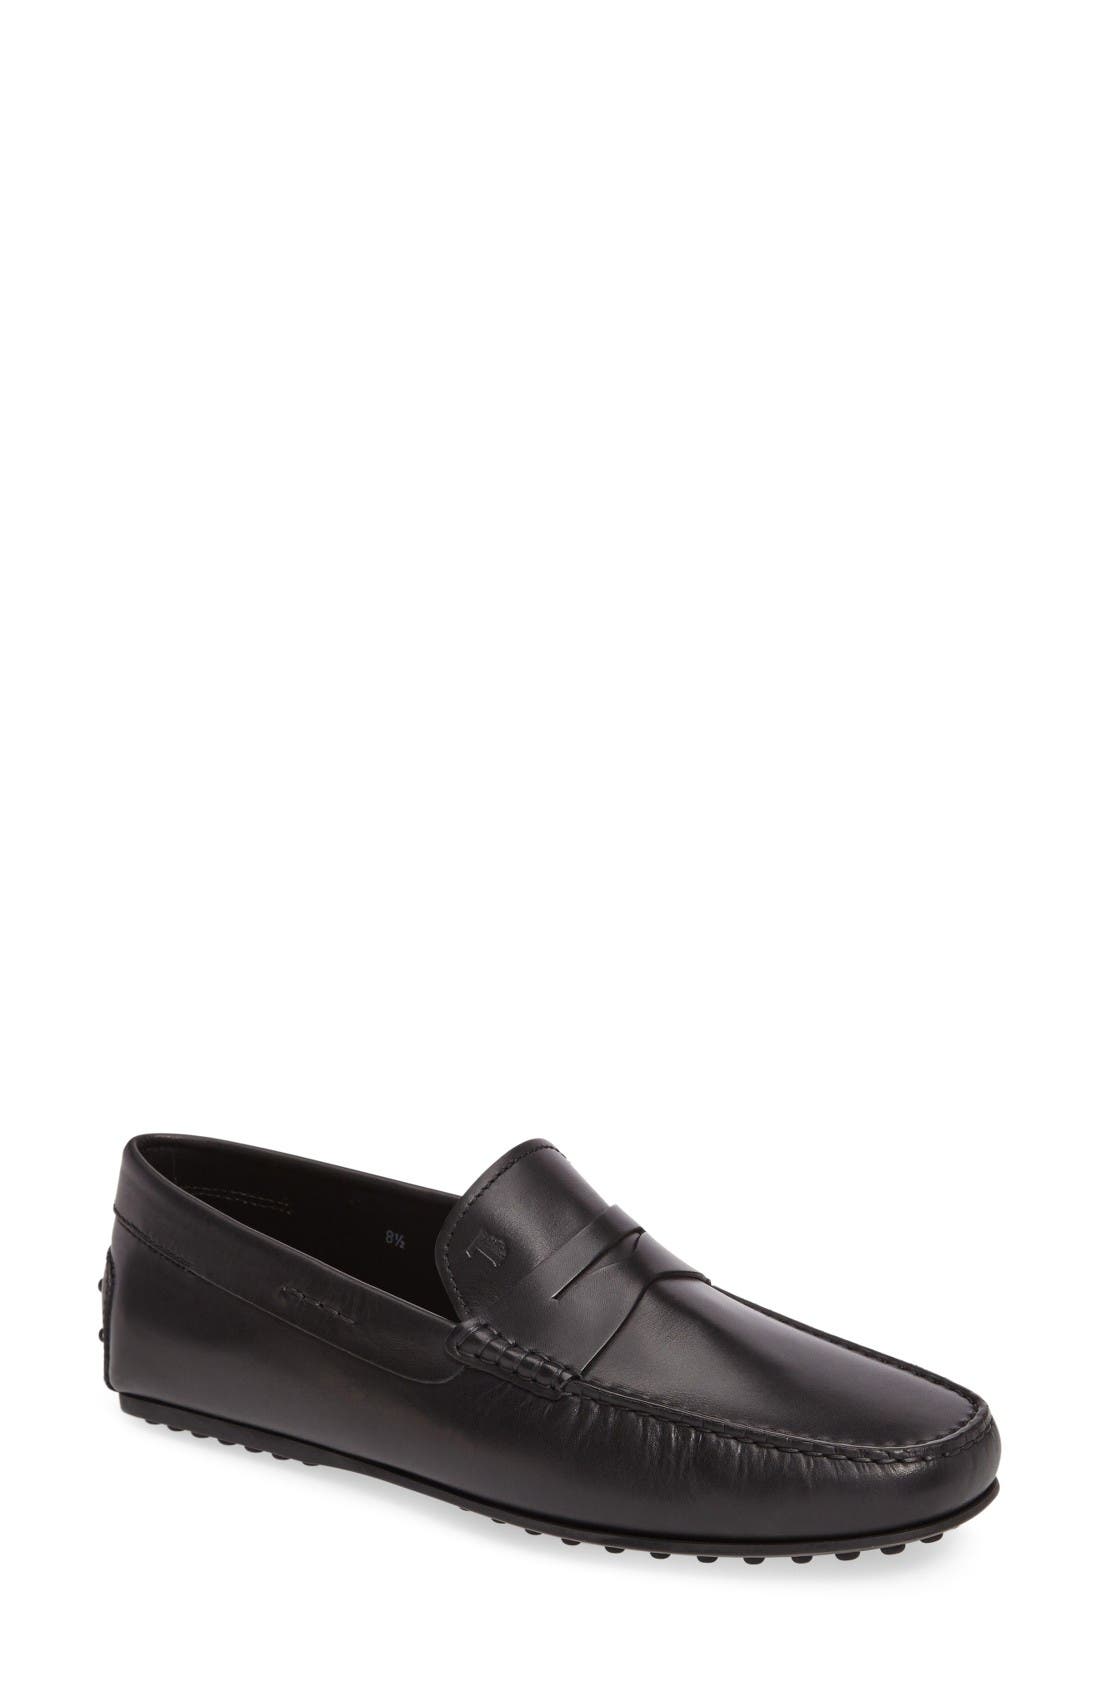 tods driving shoes mens